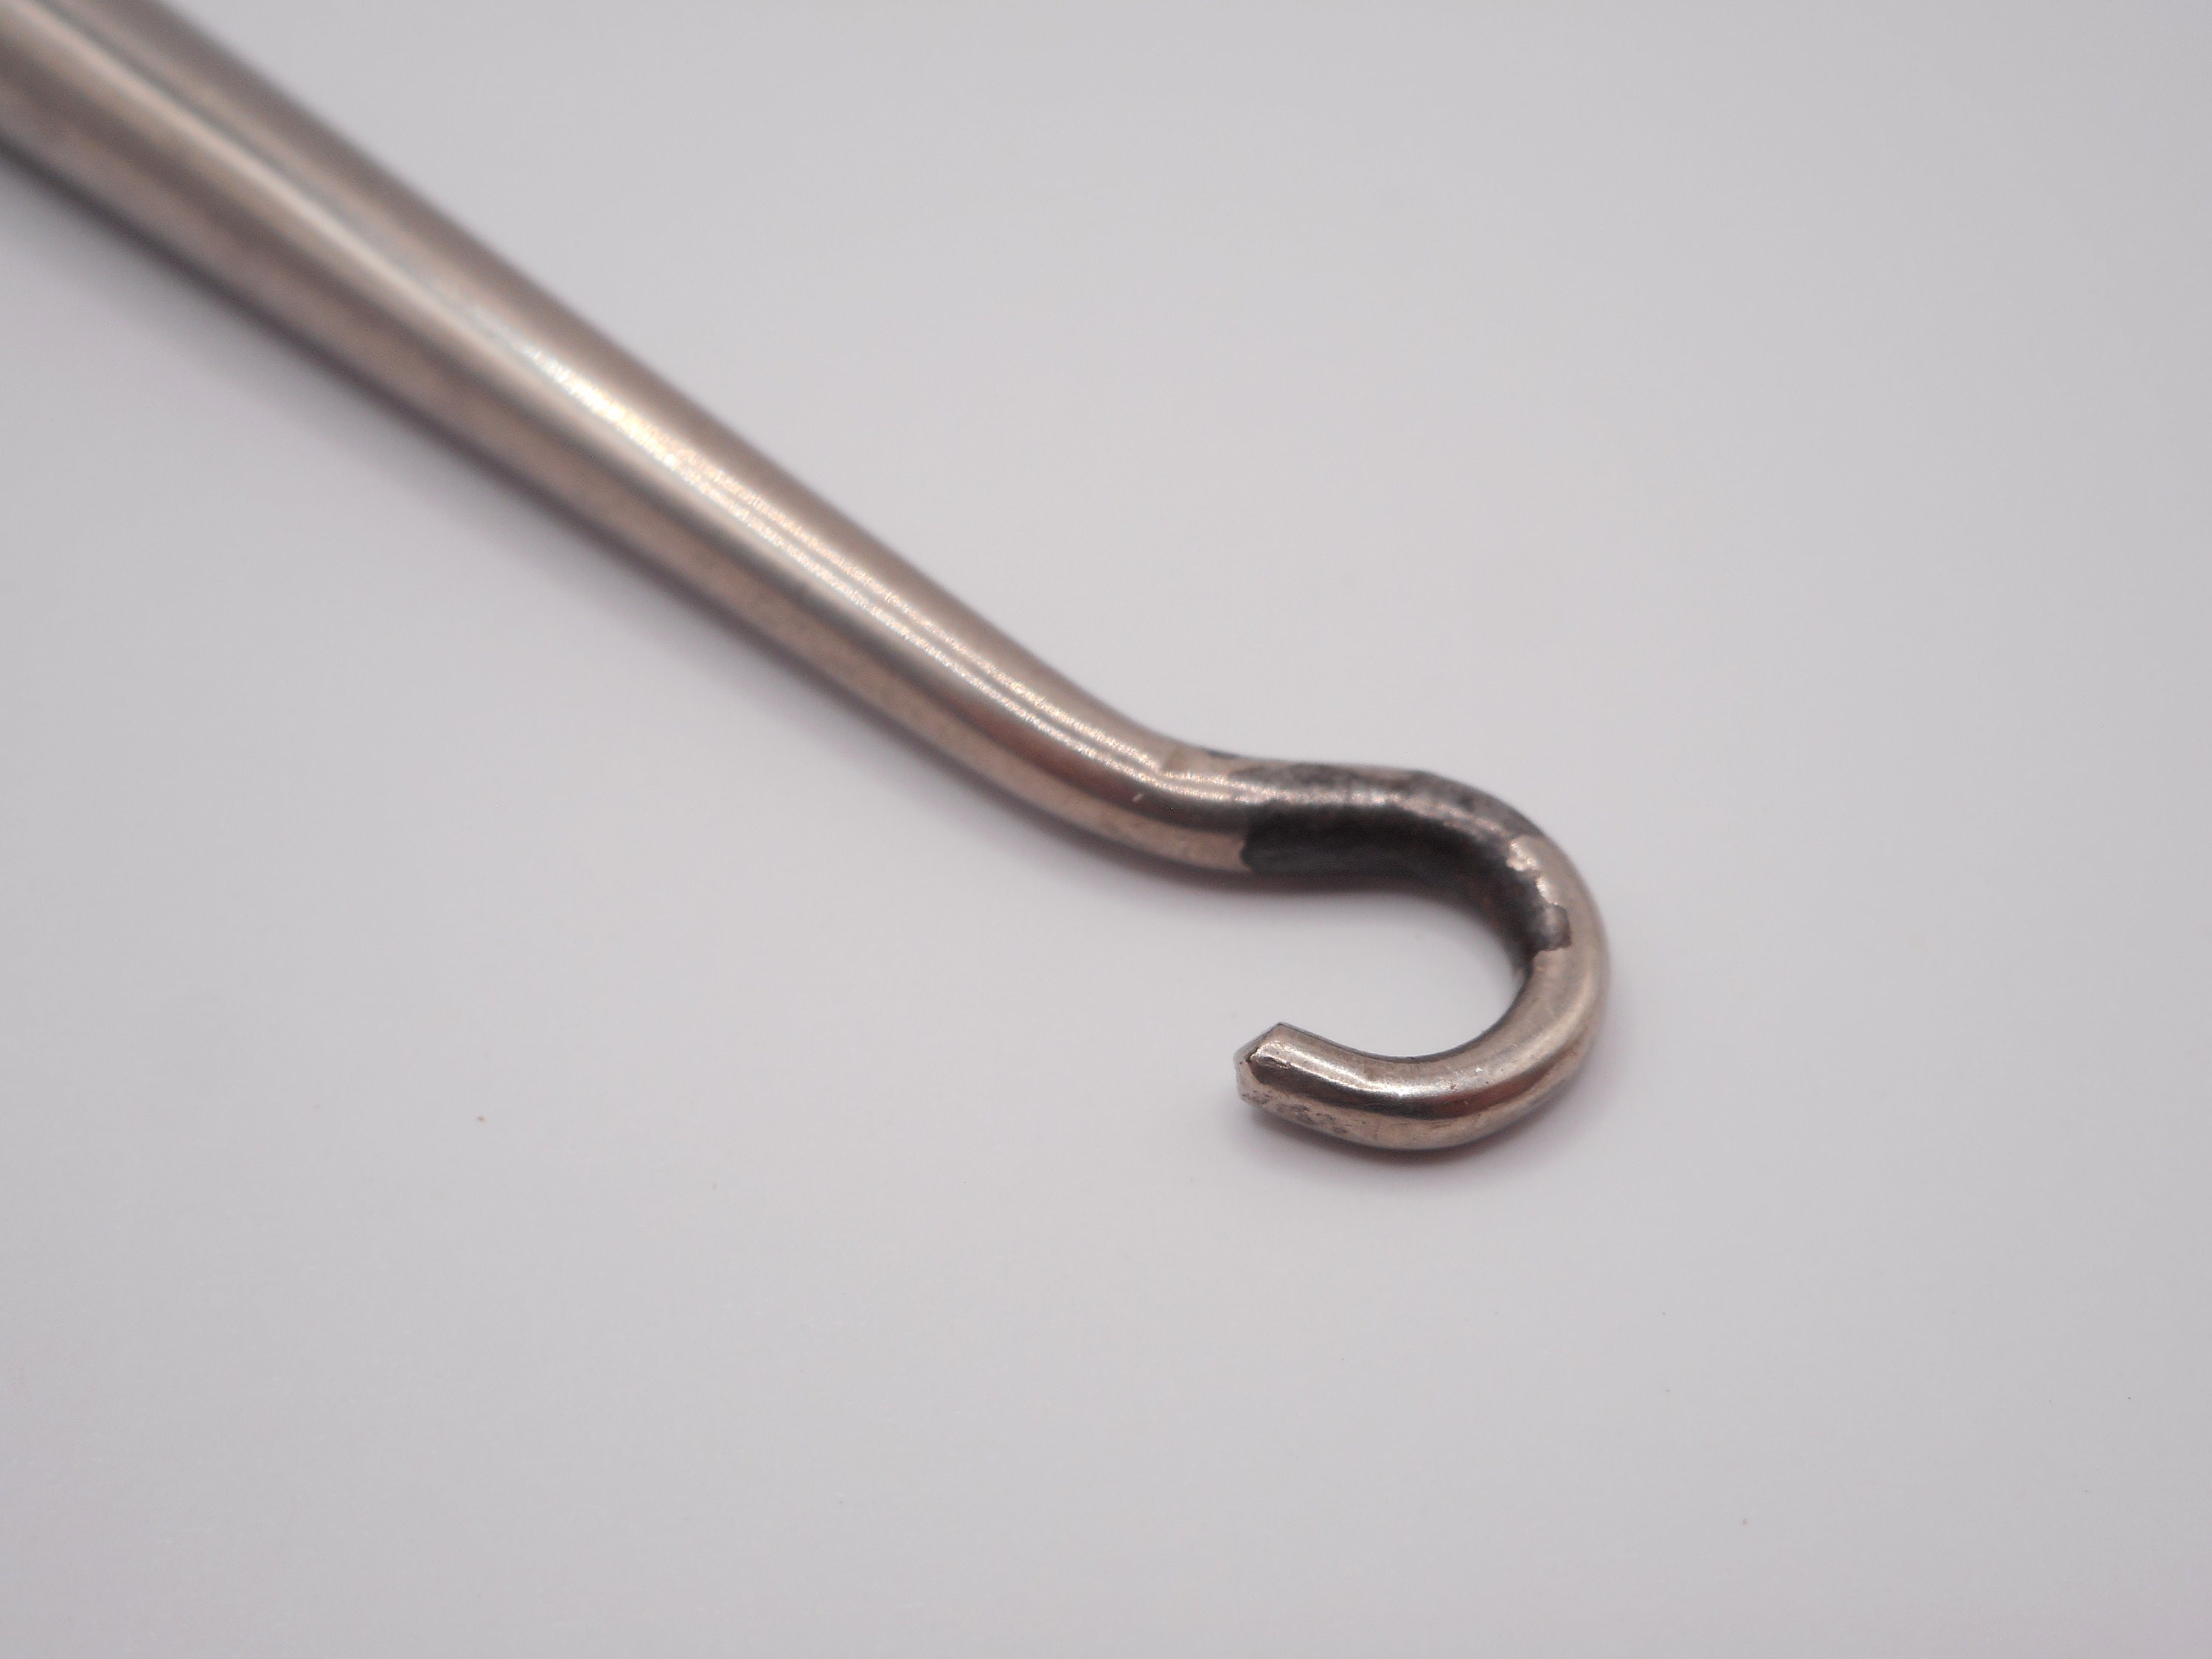 Long Sterling Silver Handled Button Hook With Engine Turned Detail